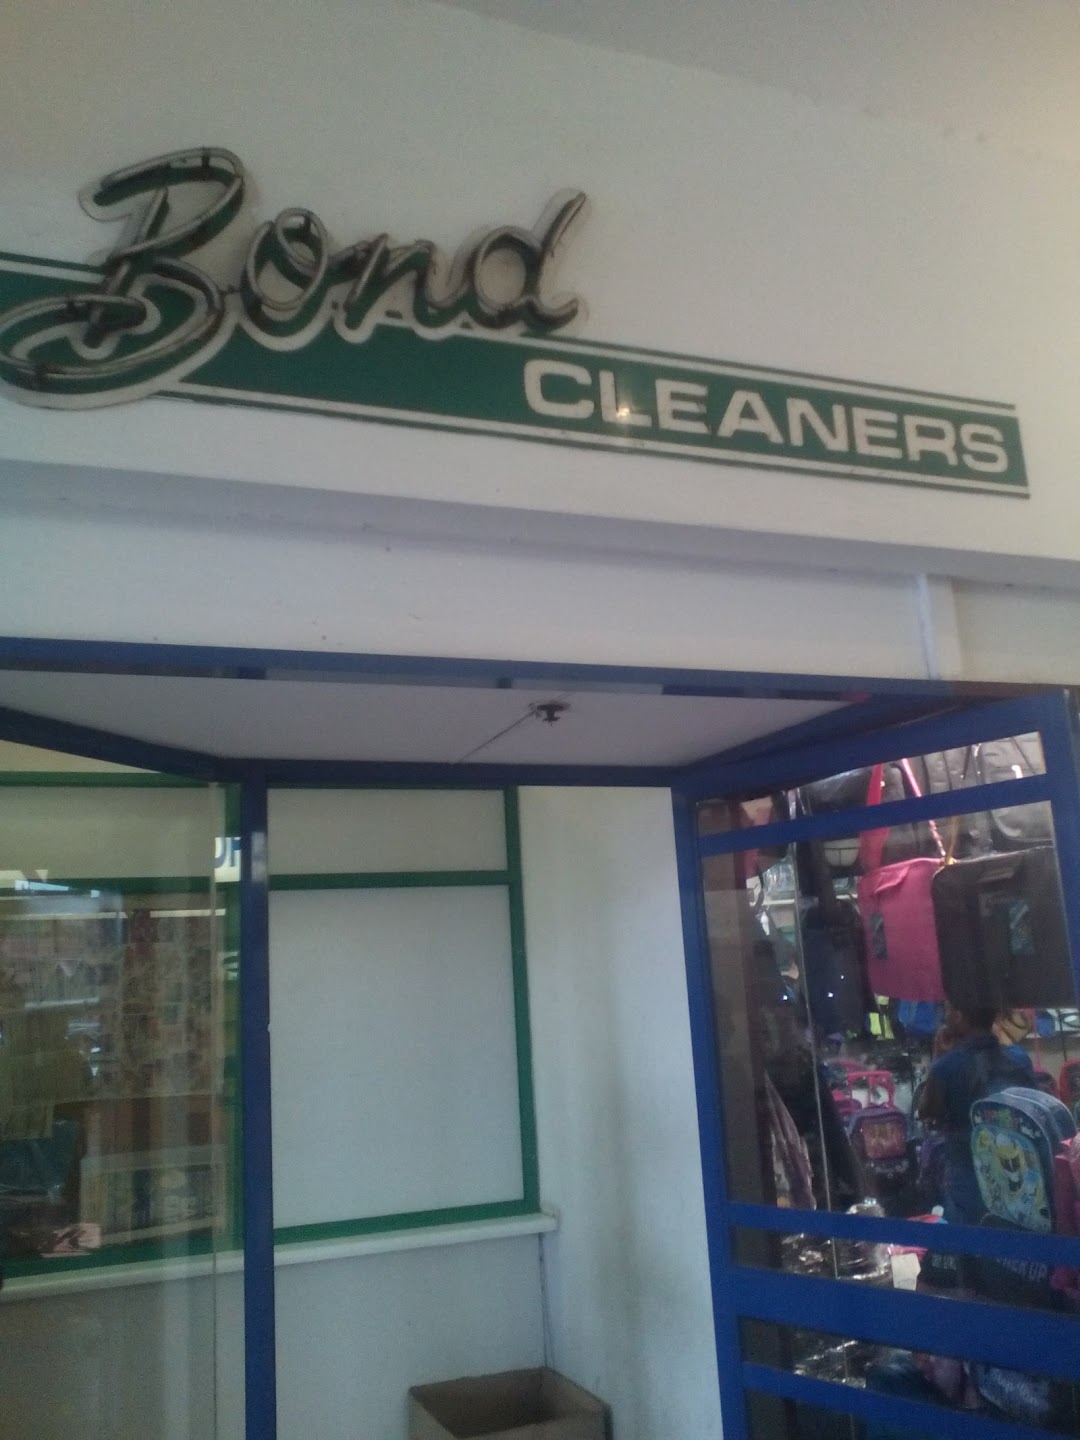 Bond Cleaners